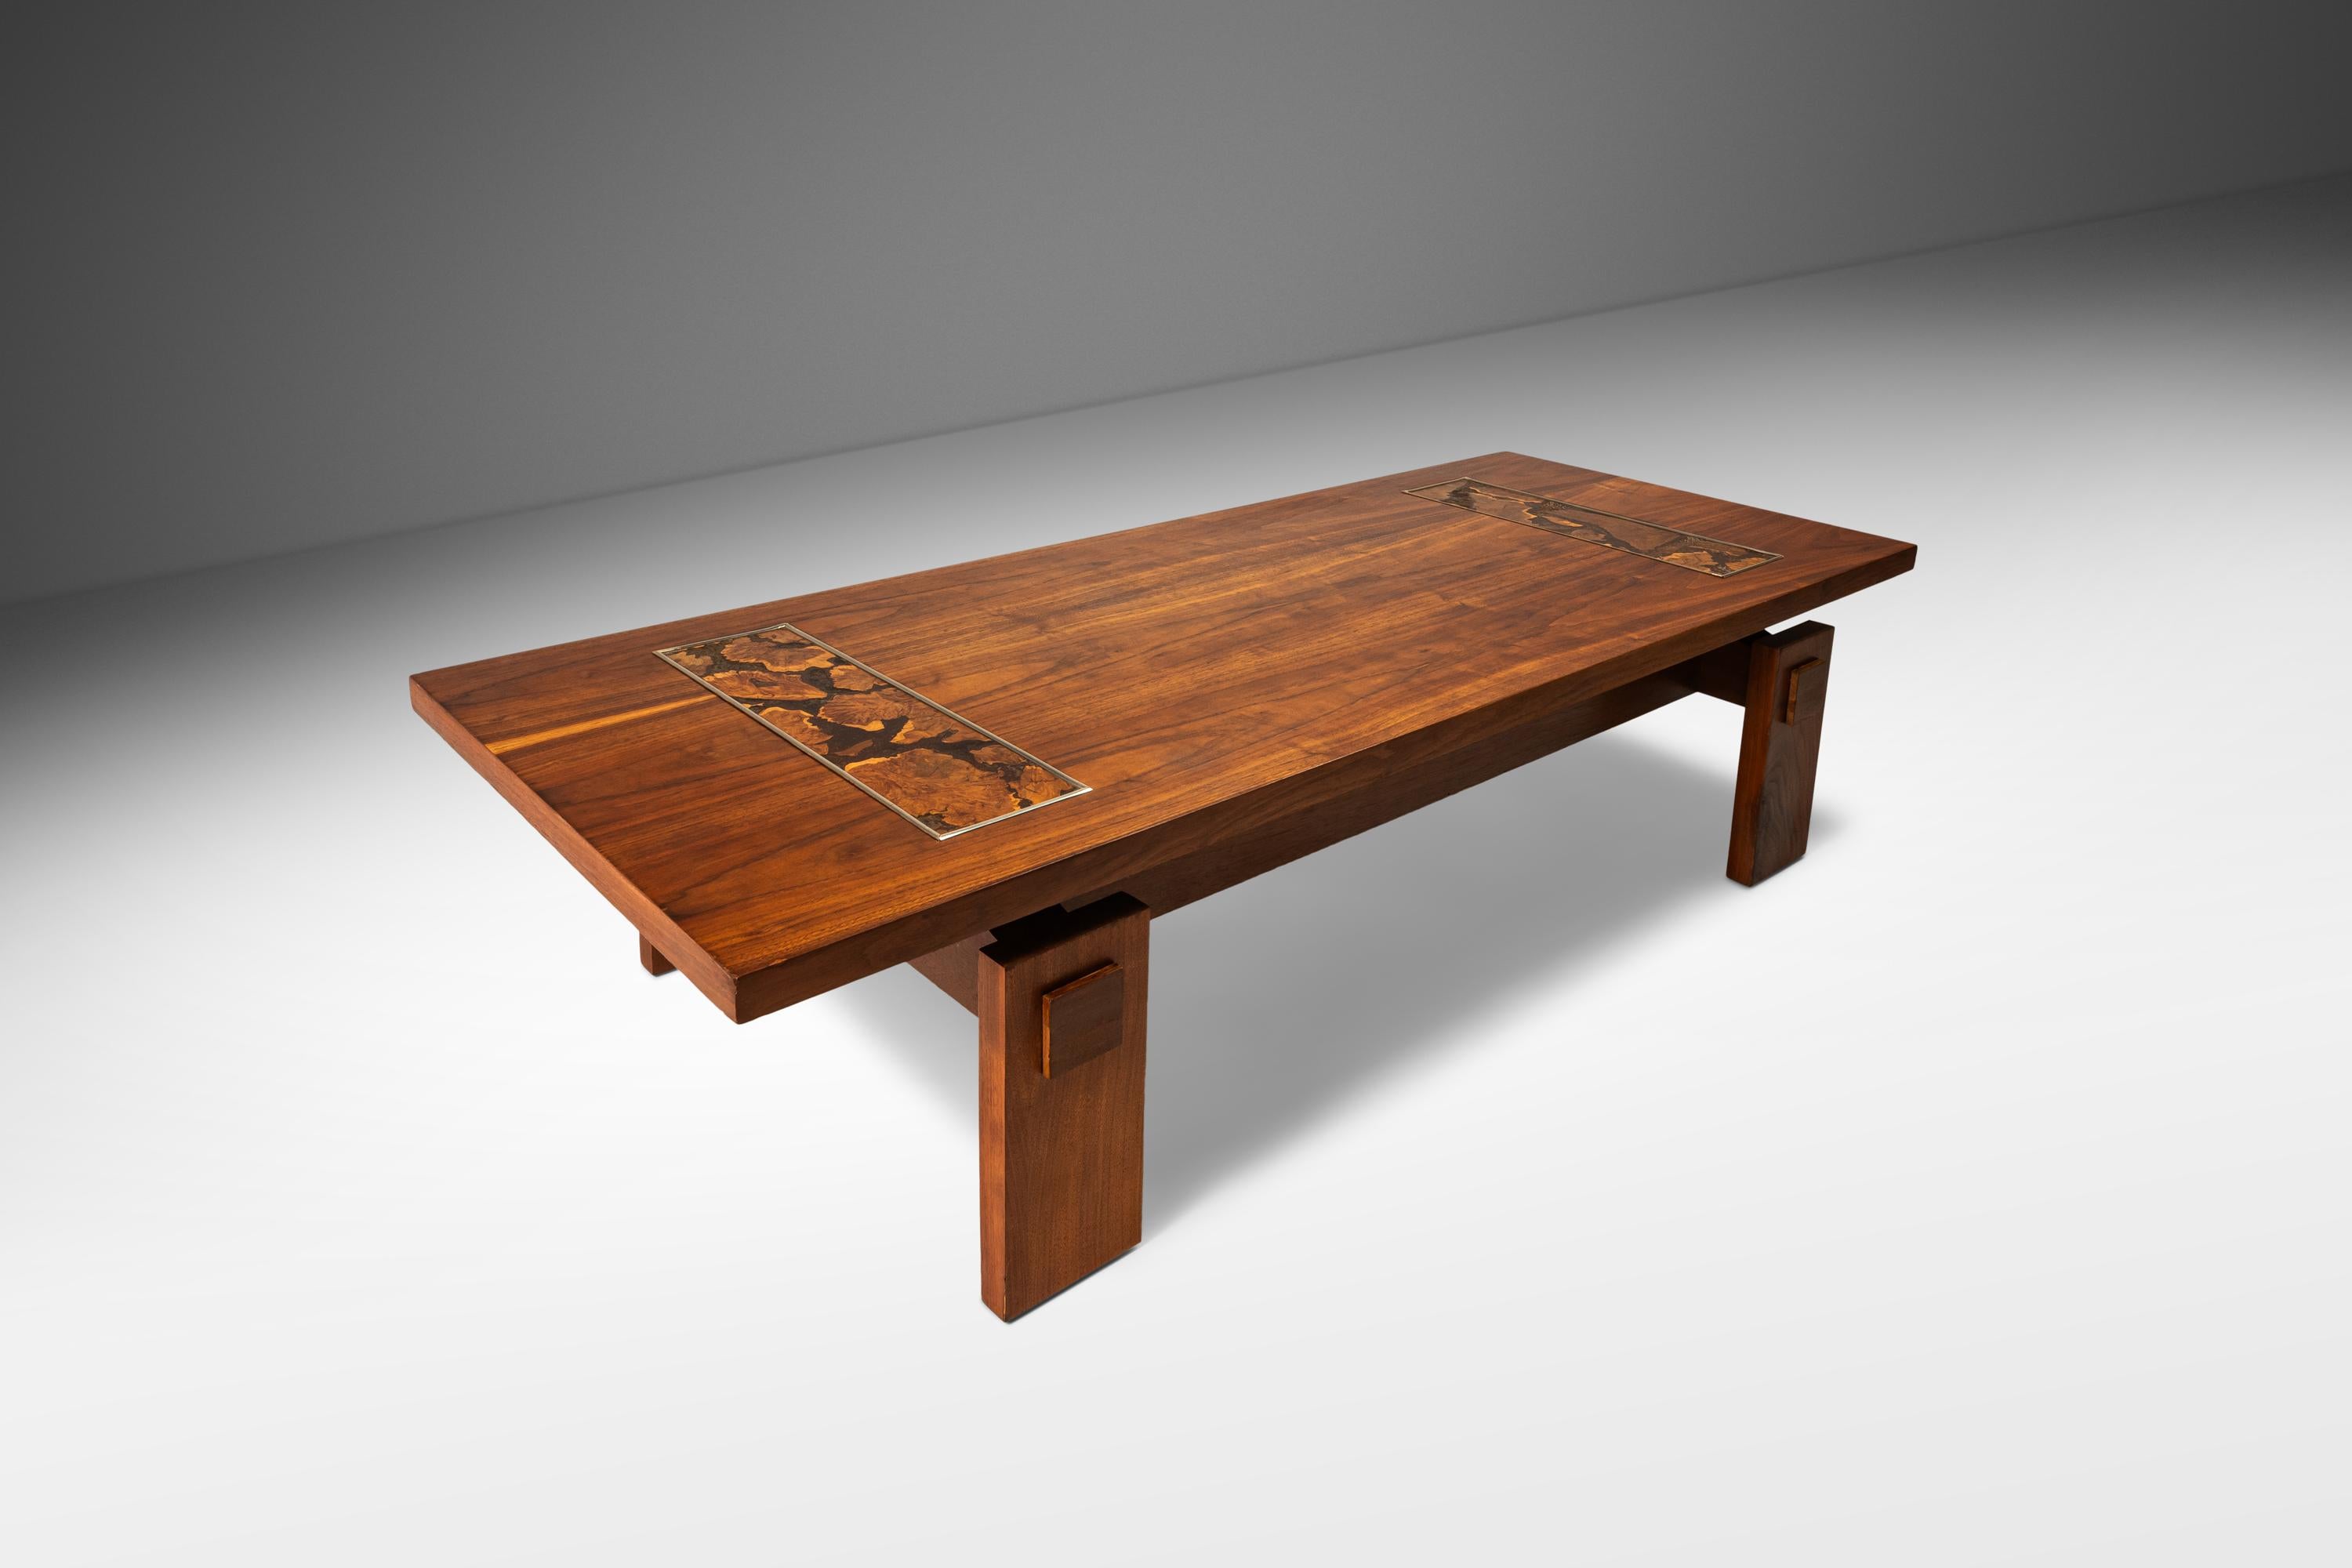 American Modern Brutalist Coffee Table in Walnut with Burlwood Inlay by Lane, c. 1970's